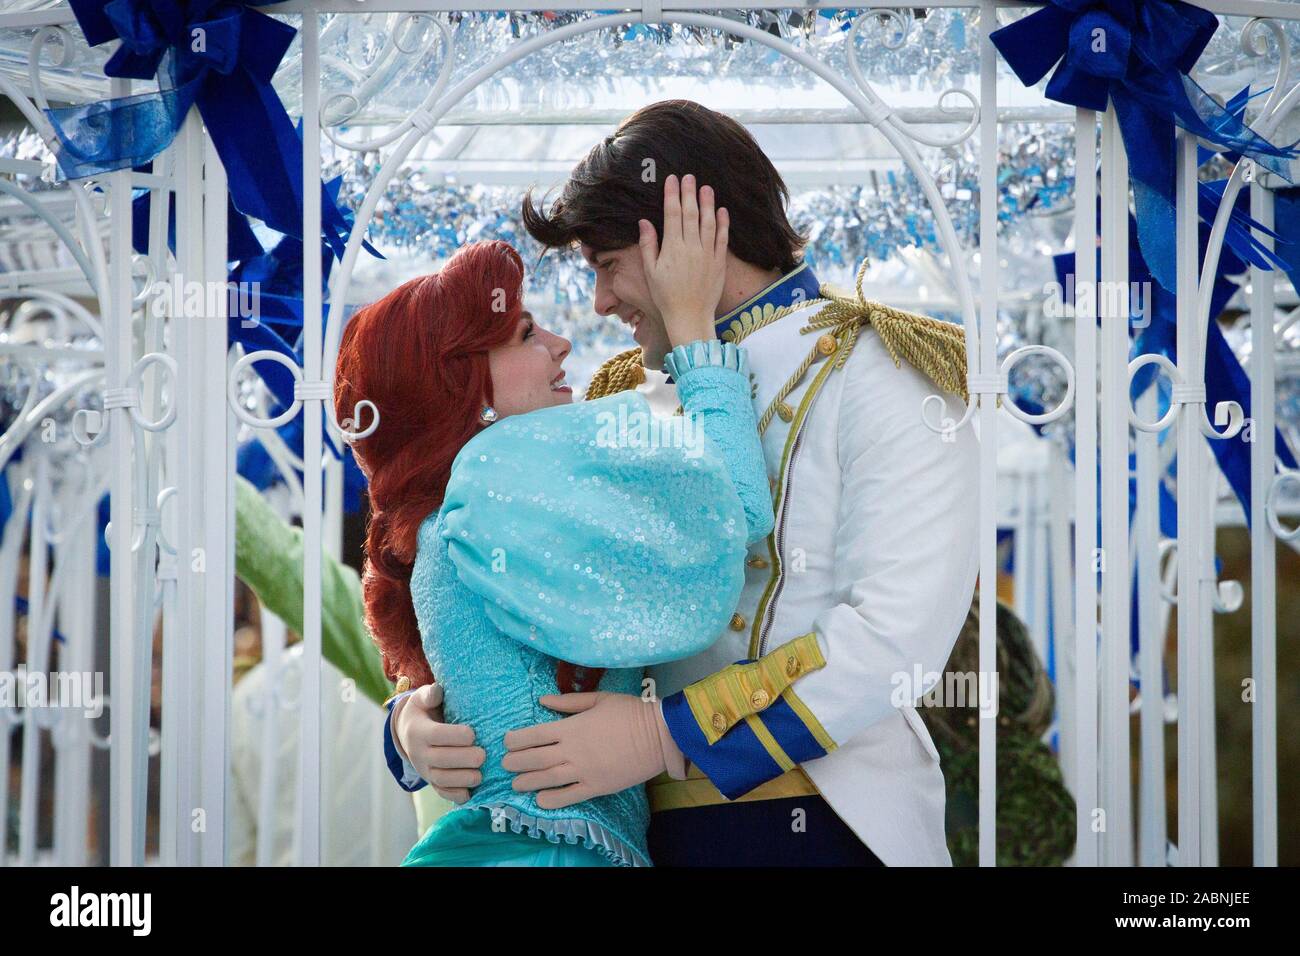 Philadelphia, Pennsylvania, USA. November 28, 2019: Disney characters Ariel the Little Mermaid and Prince Eric are featured on a float in the 6ABC Thanksgiving Day Parade in Philadelphia, November 28, 2019. On the parade's 100th anniversary, strong winds grounded large balloons from the parade route, but turnout was still considerable on the city's Benjamin Franklin Parkway. (Credit Image: © Michael Candelori/ZUMA Wire) Stock Photo